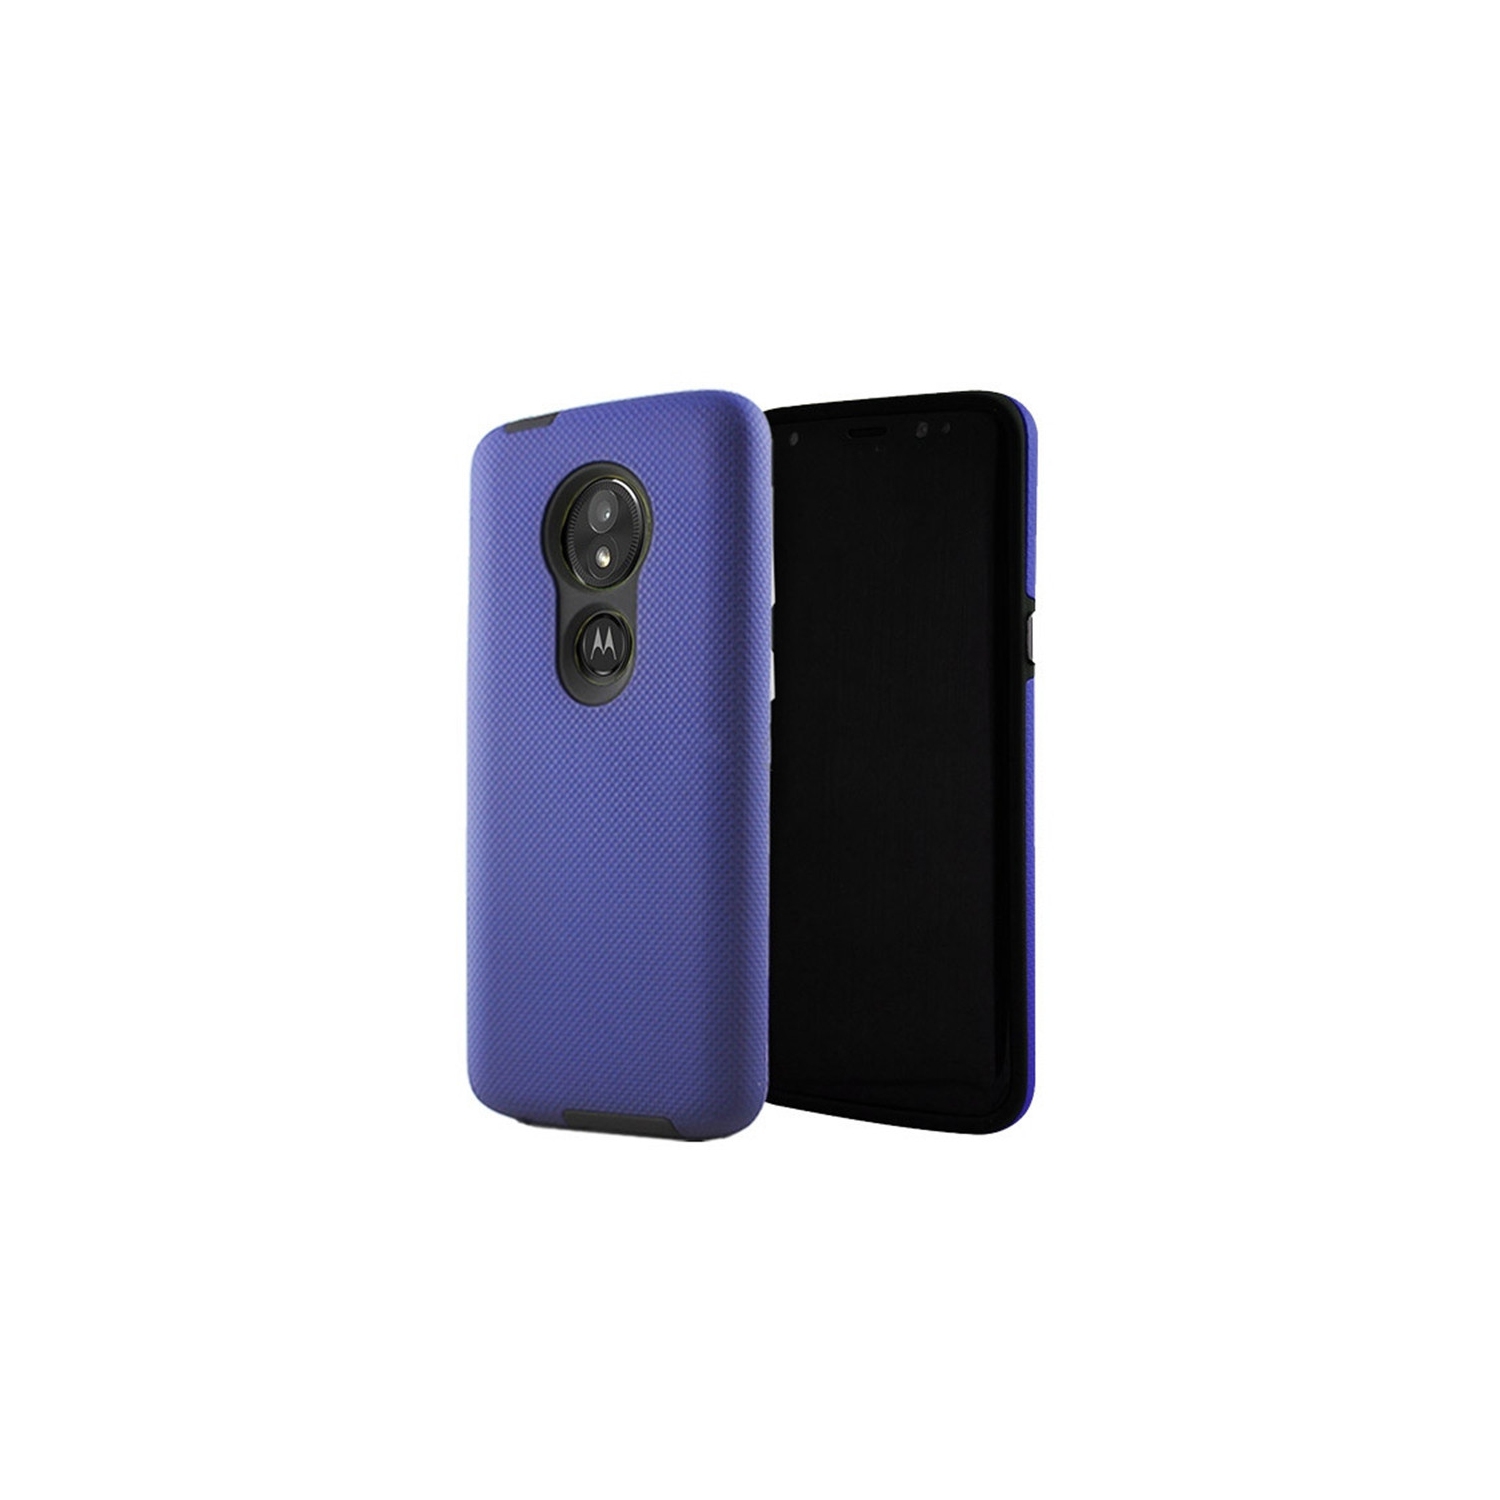 【CSmart】 Slim Fitted Hybrid Hard PC Shell Shockproof Scratch Resistant Case Cover for Motorola Moto G7 Play, Navy